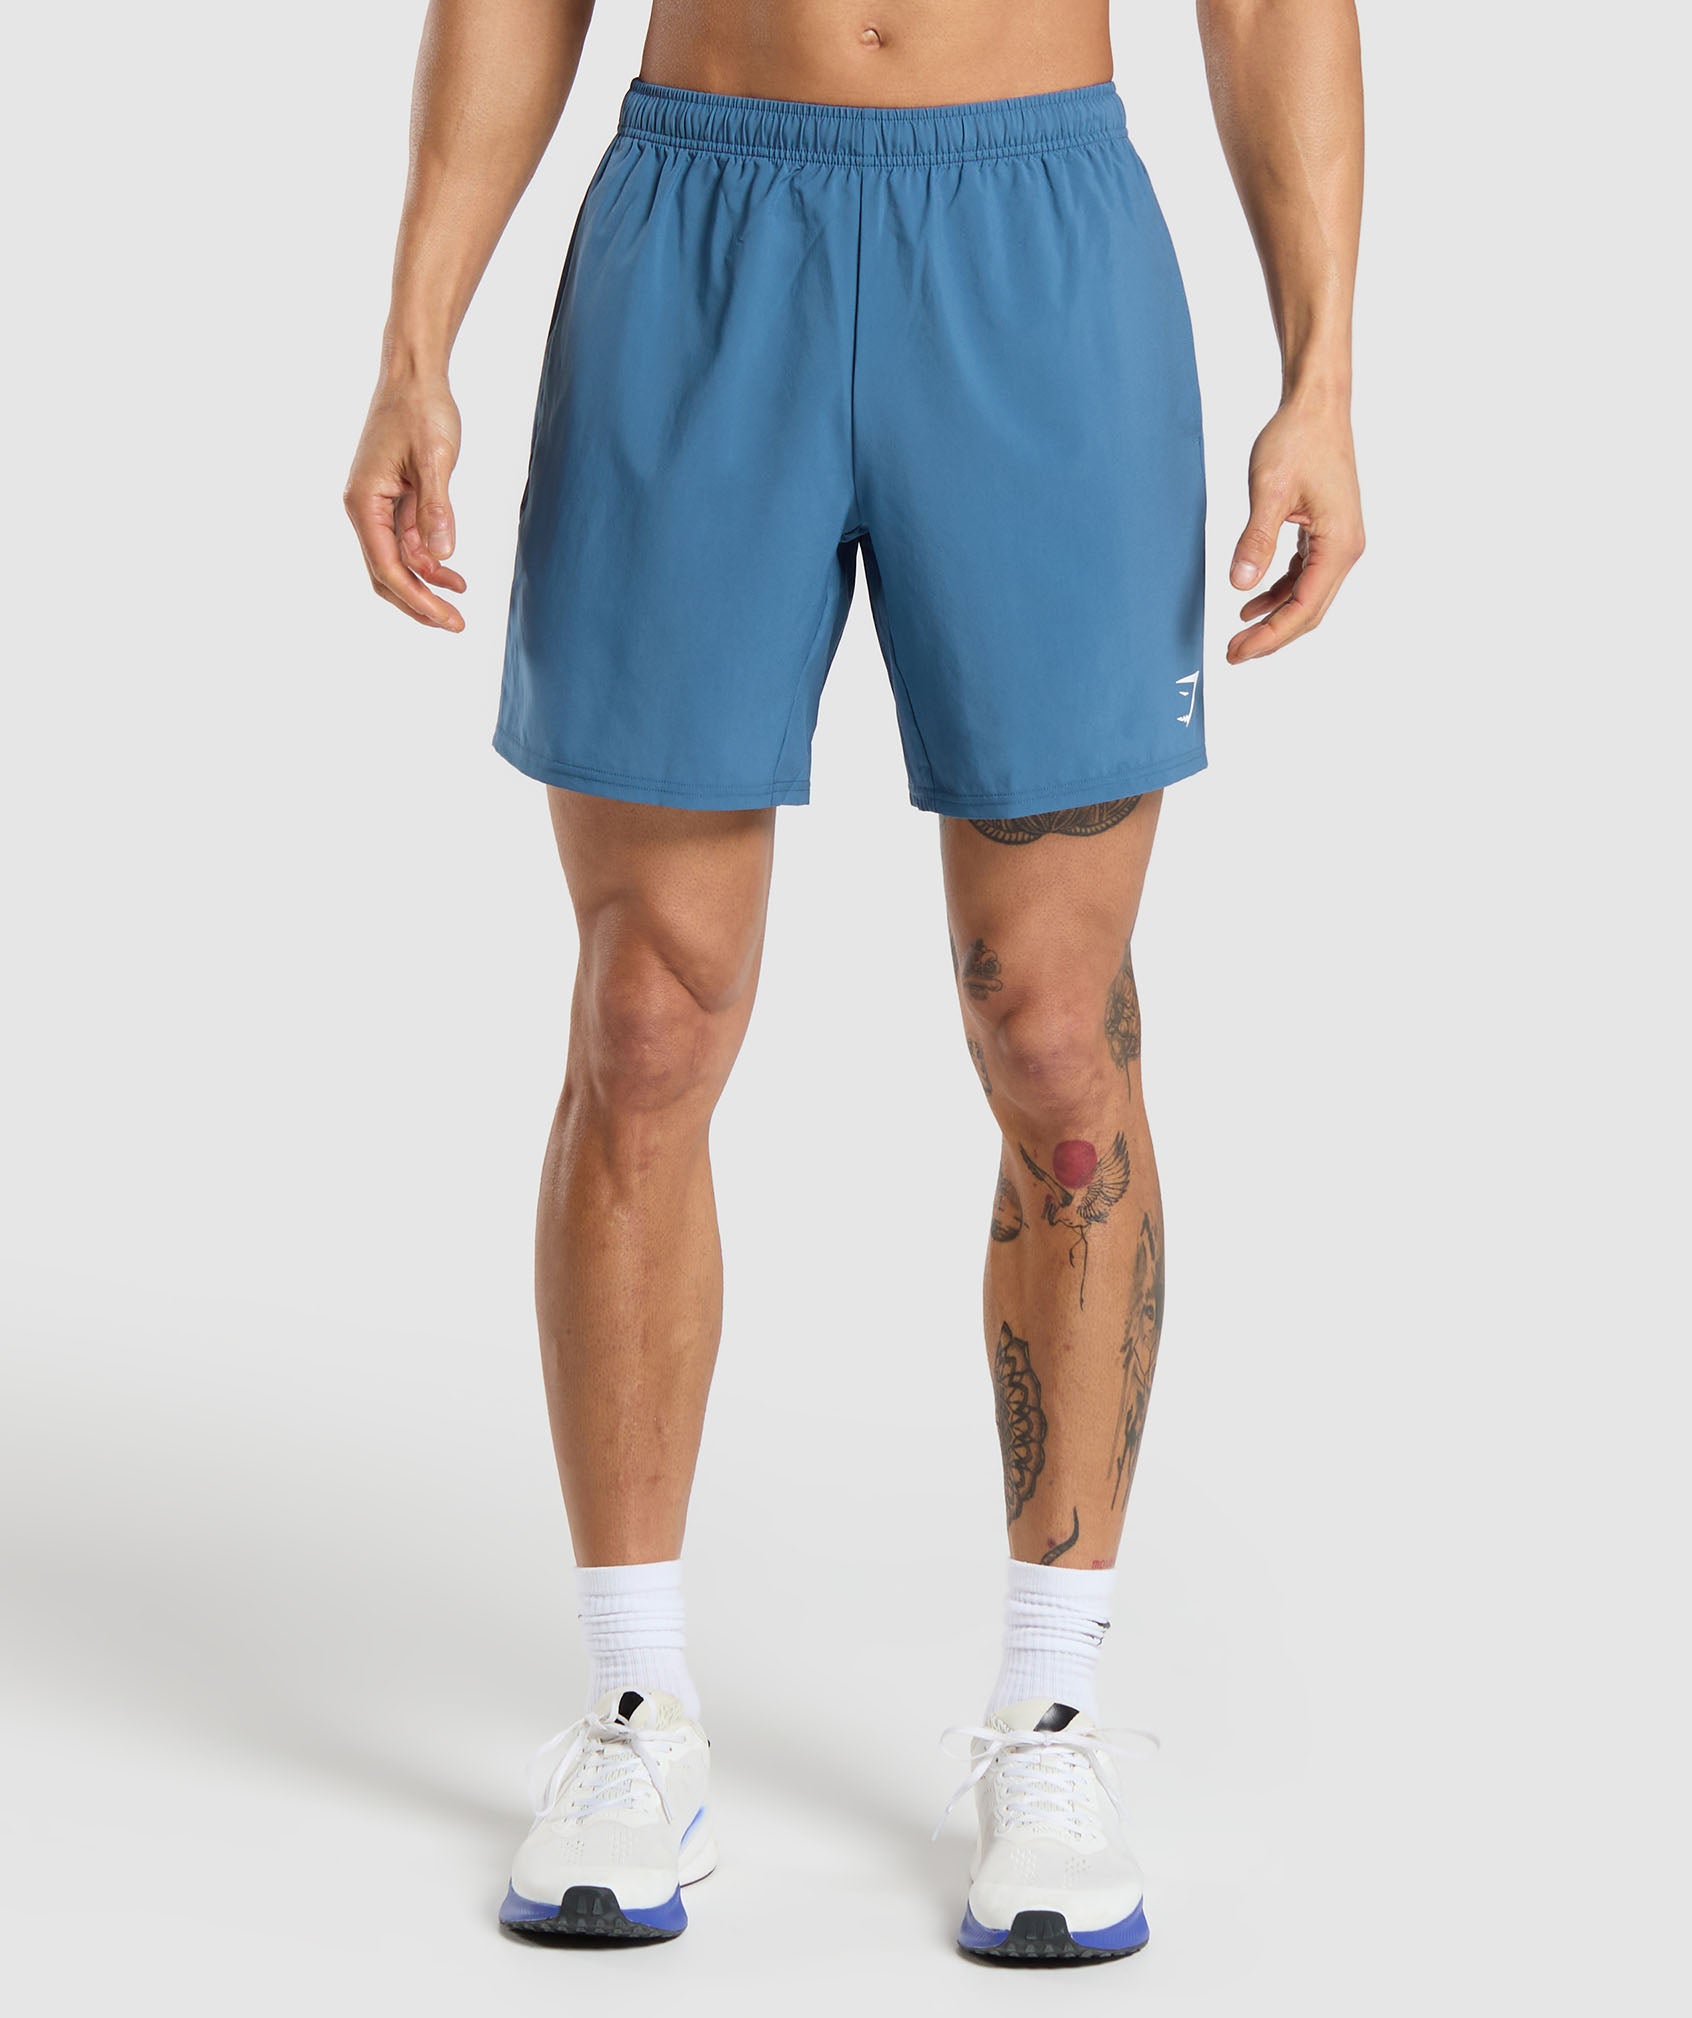 Arrival 7" Shorts in Utility Blue